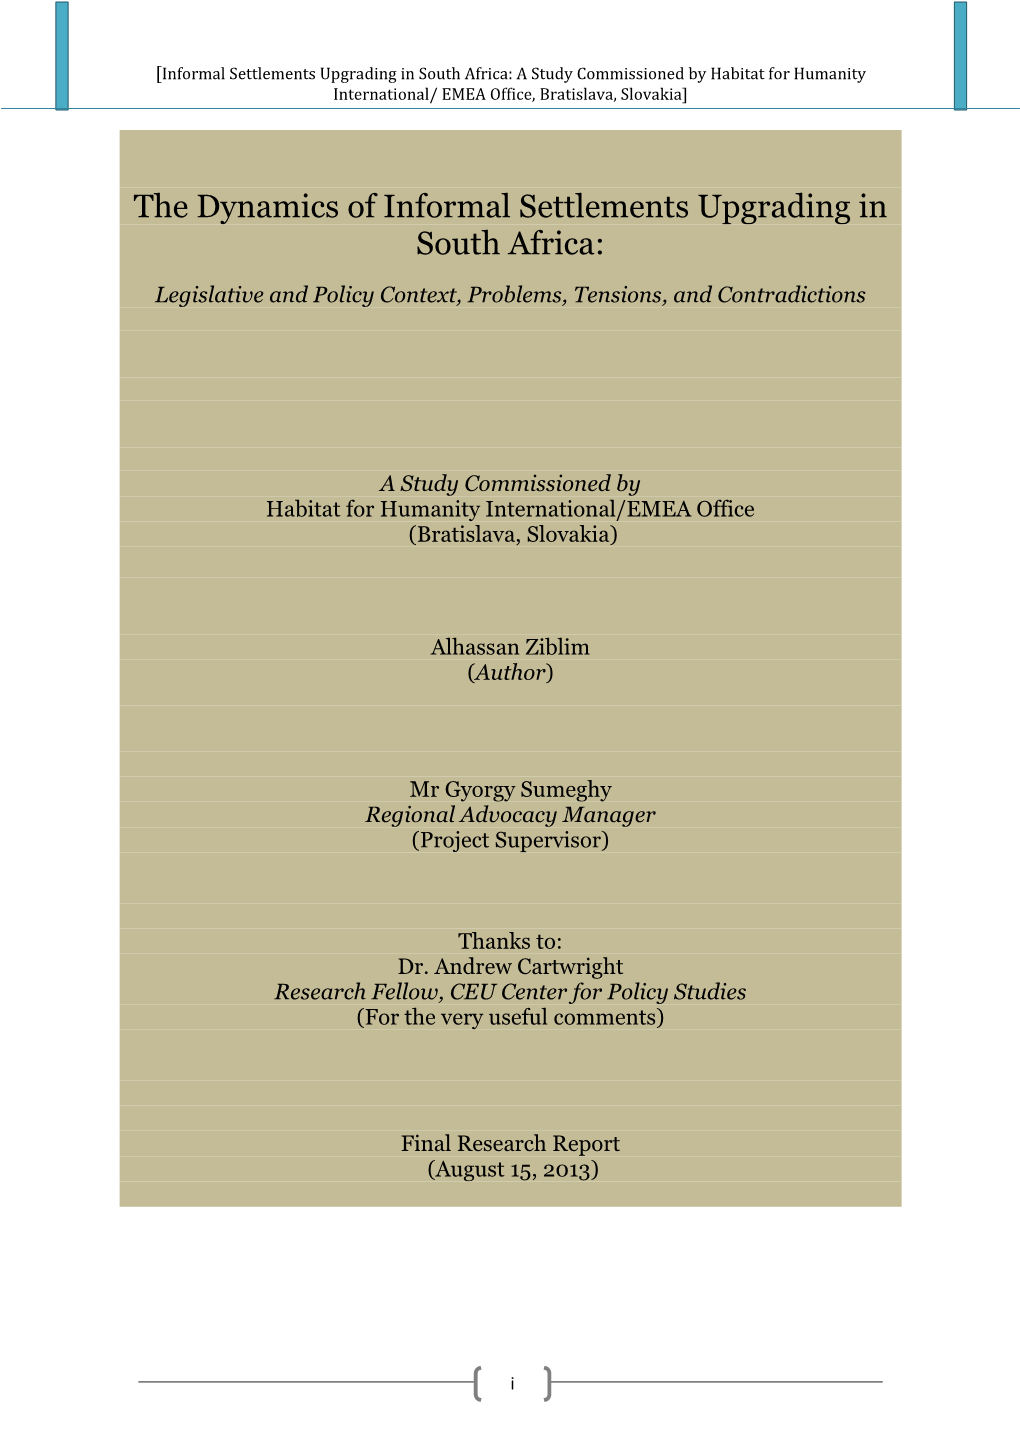 The Dynamics of Informal Settlements Upgrading in South Africa